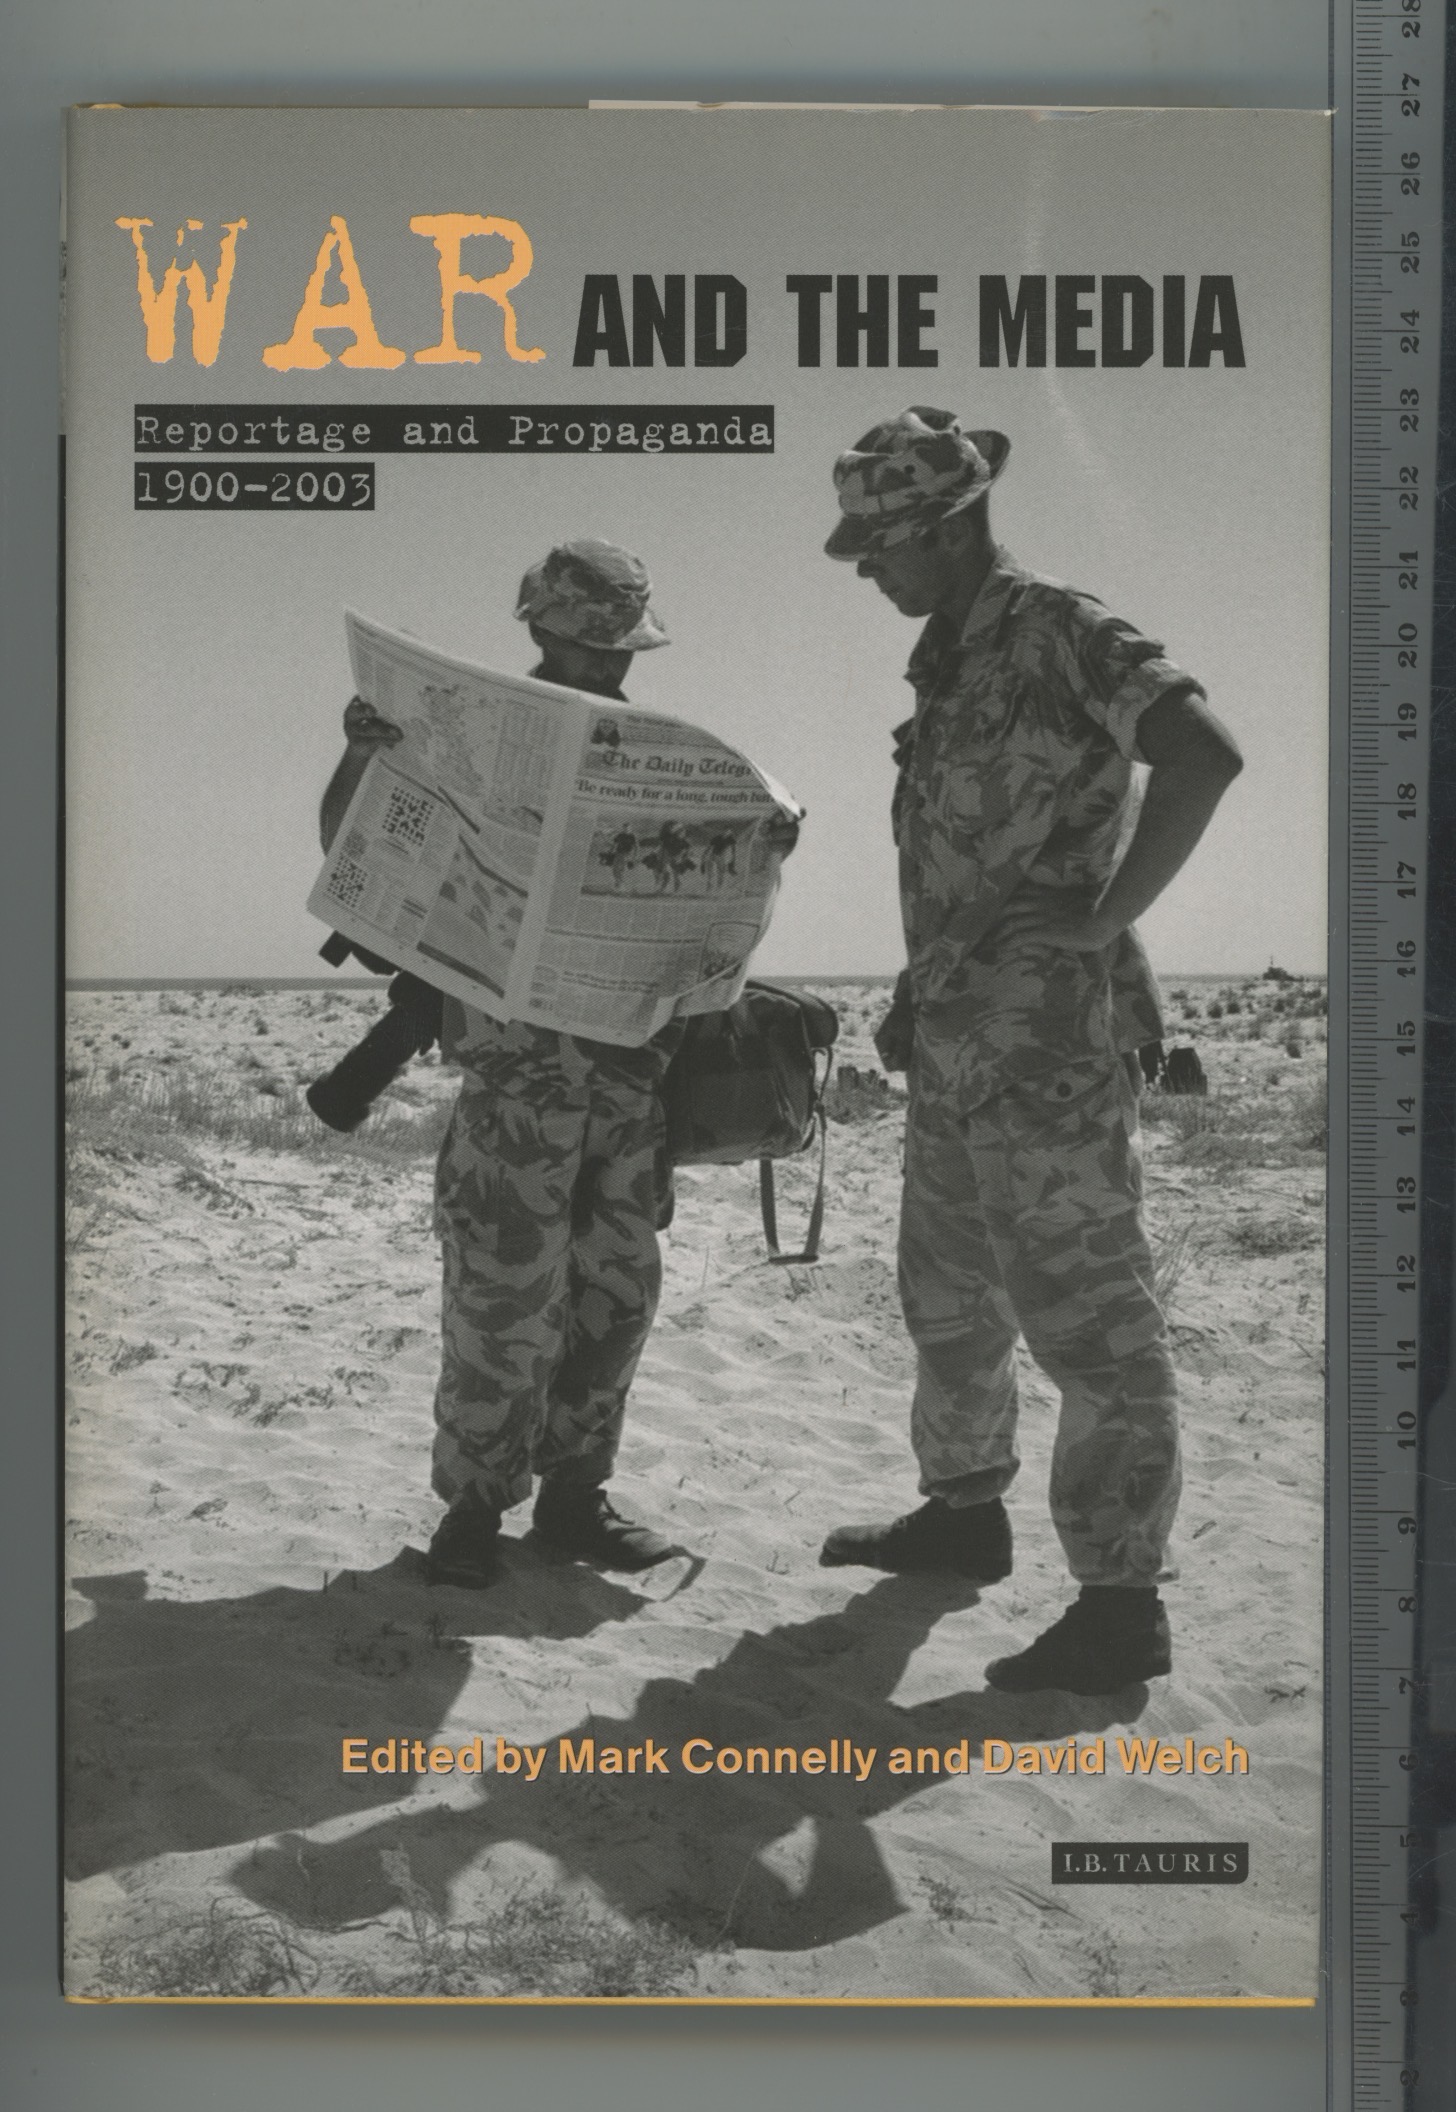 War and the Media: Reportage and Propaganda, 1900-2003 (International Library of War Studies): v. 3 - Mark Connelly & David Welch (eds)